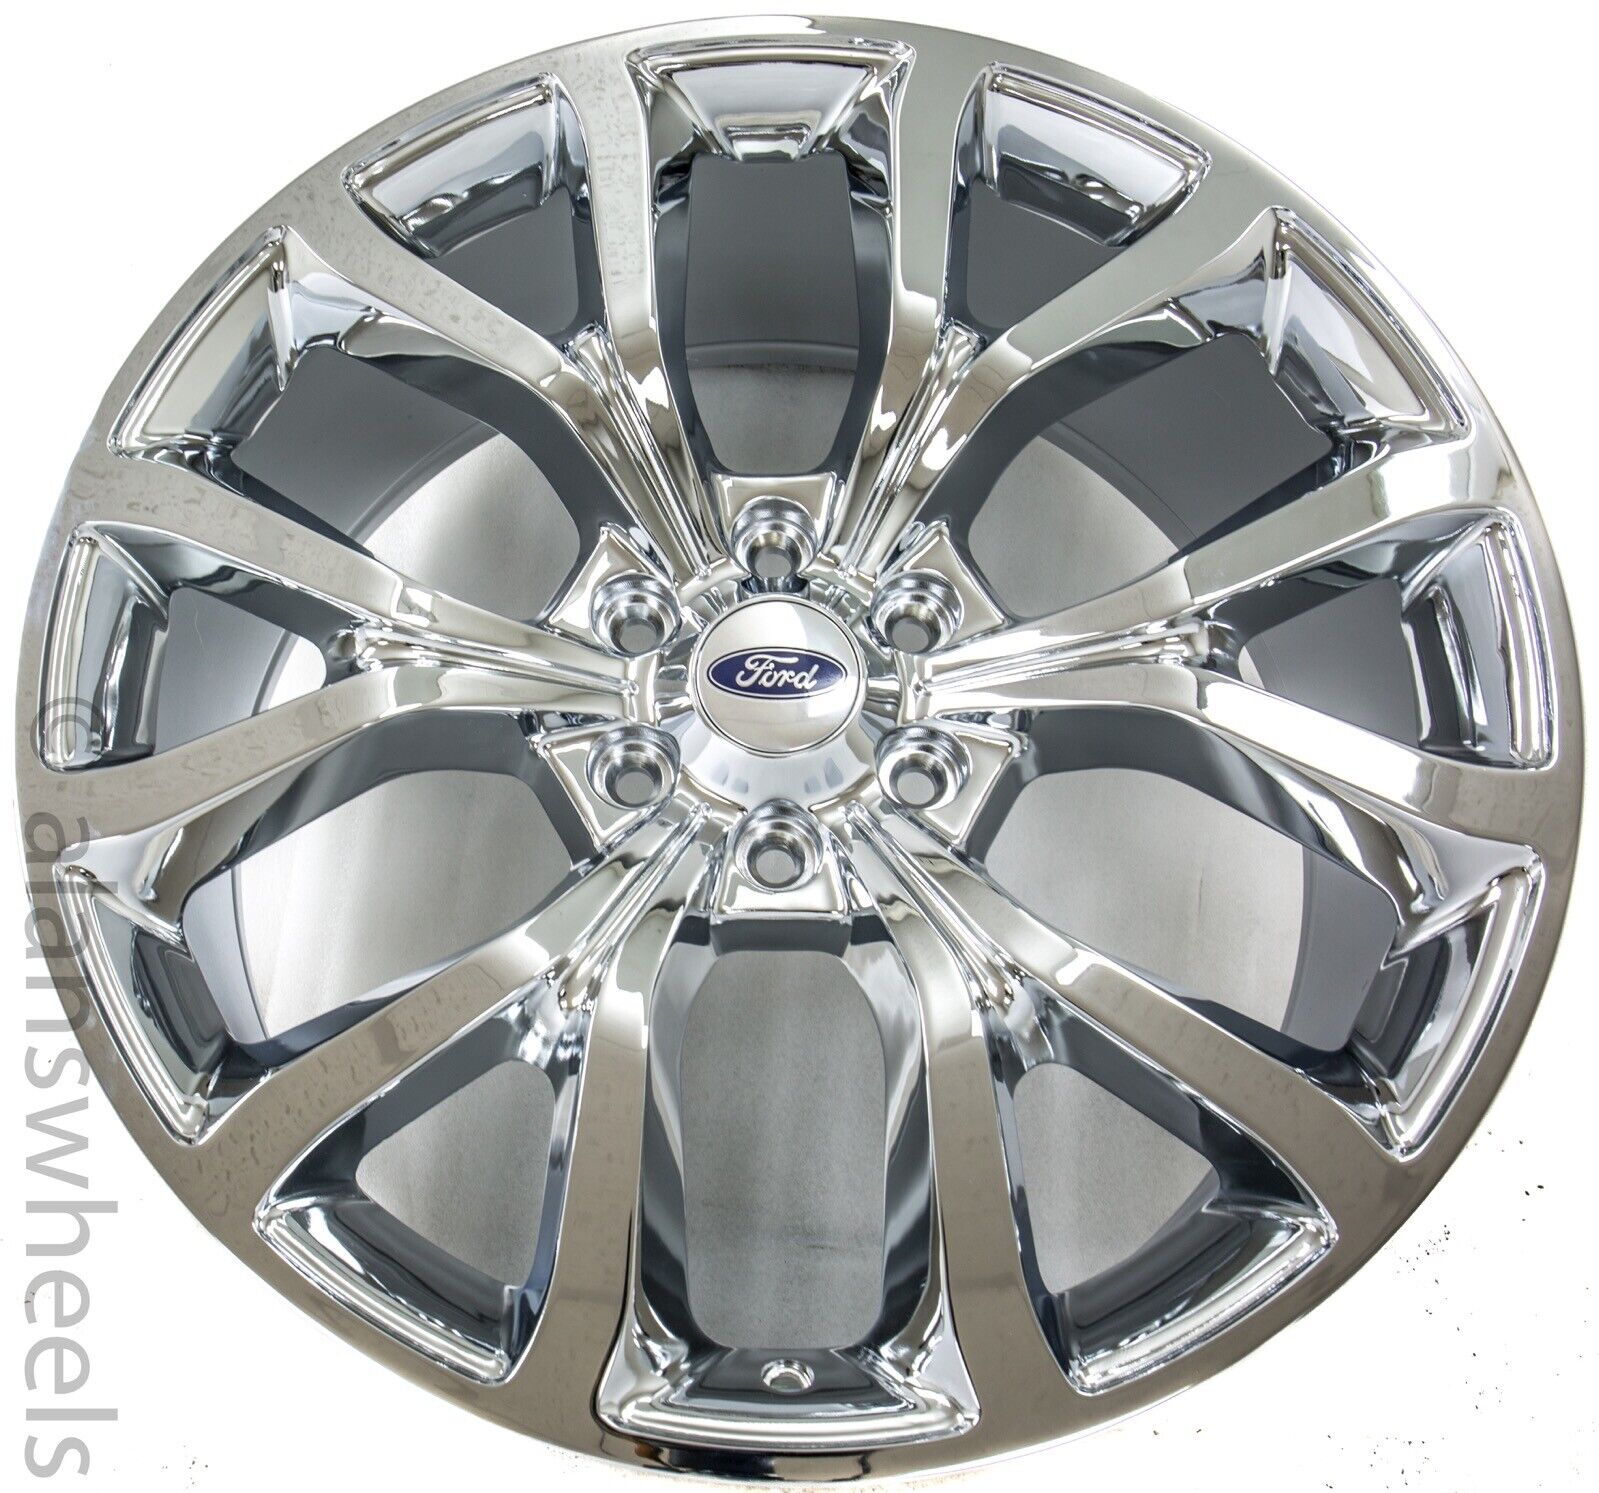 4 NEW Ford Expedition F150 22” Chrome Wheels Rims  10145